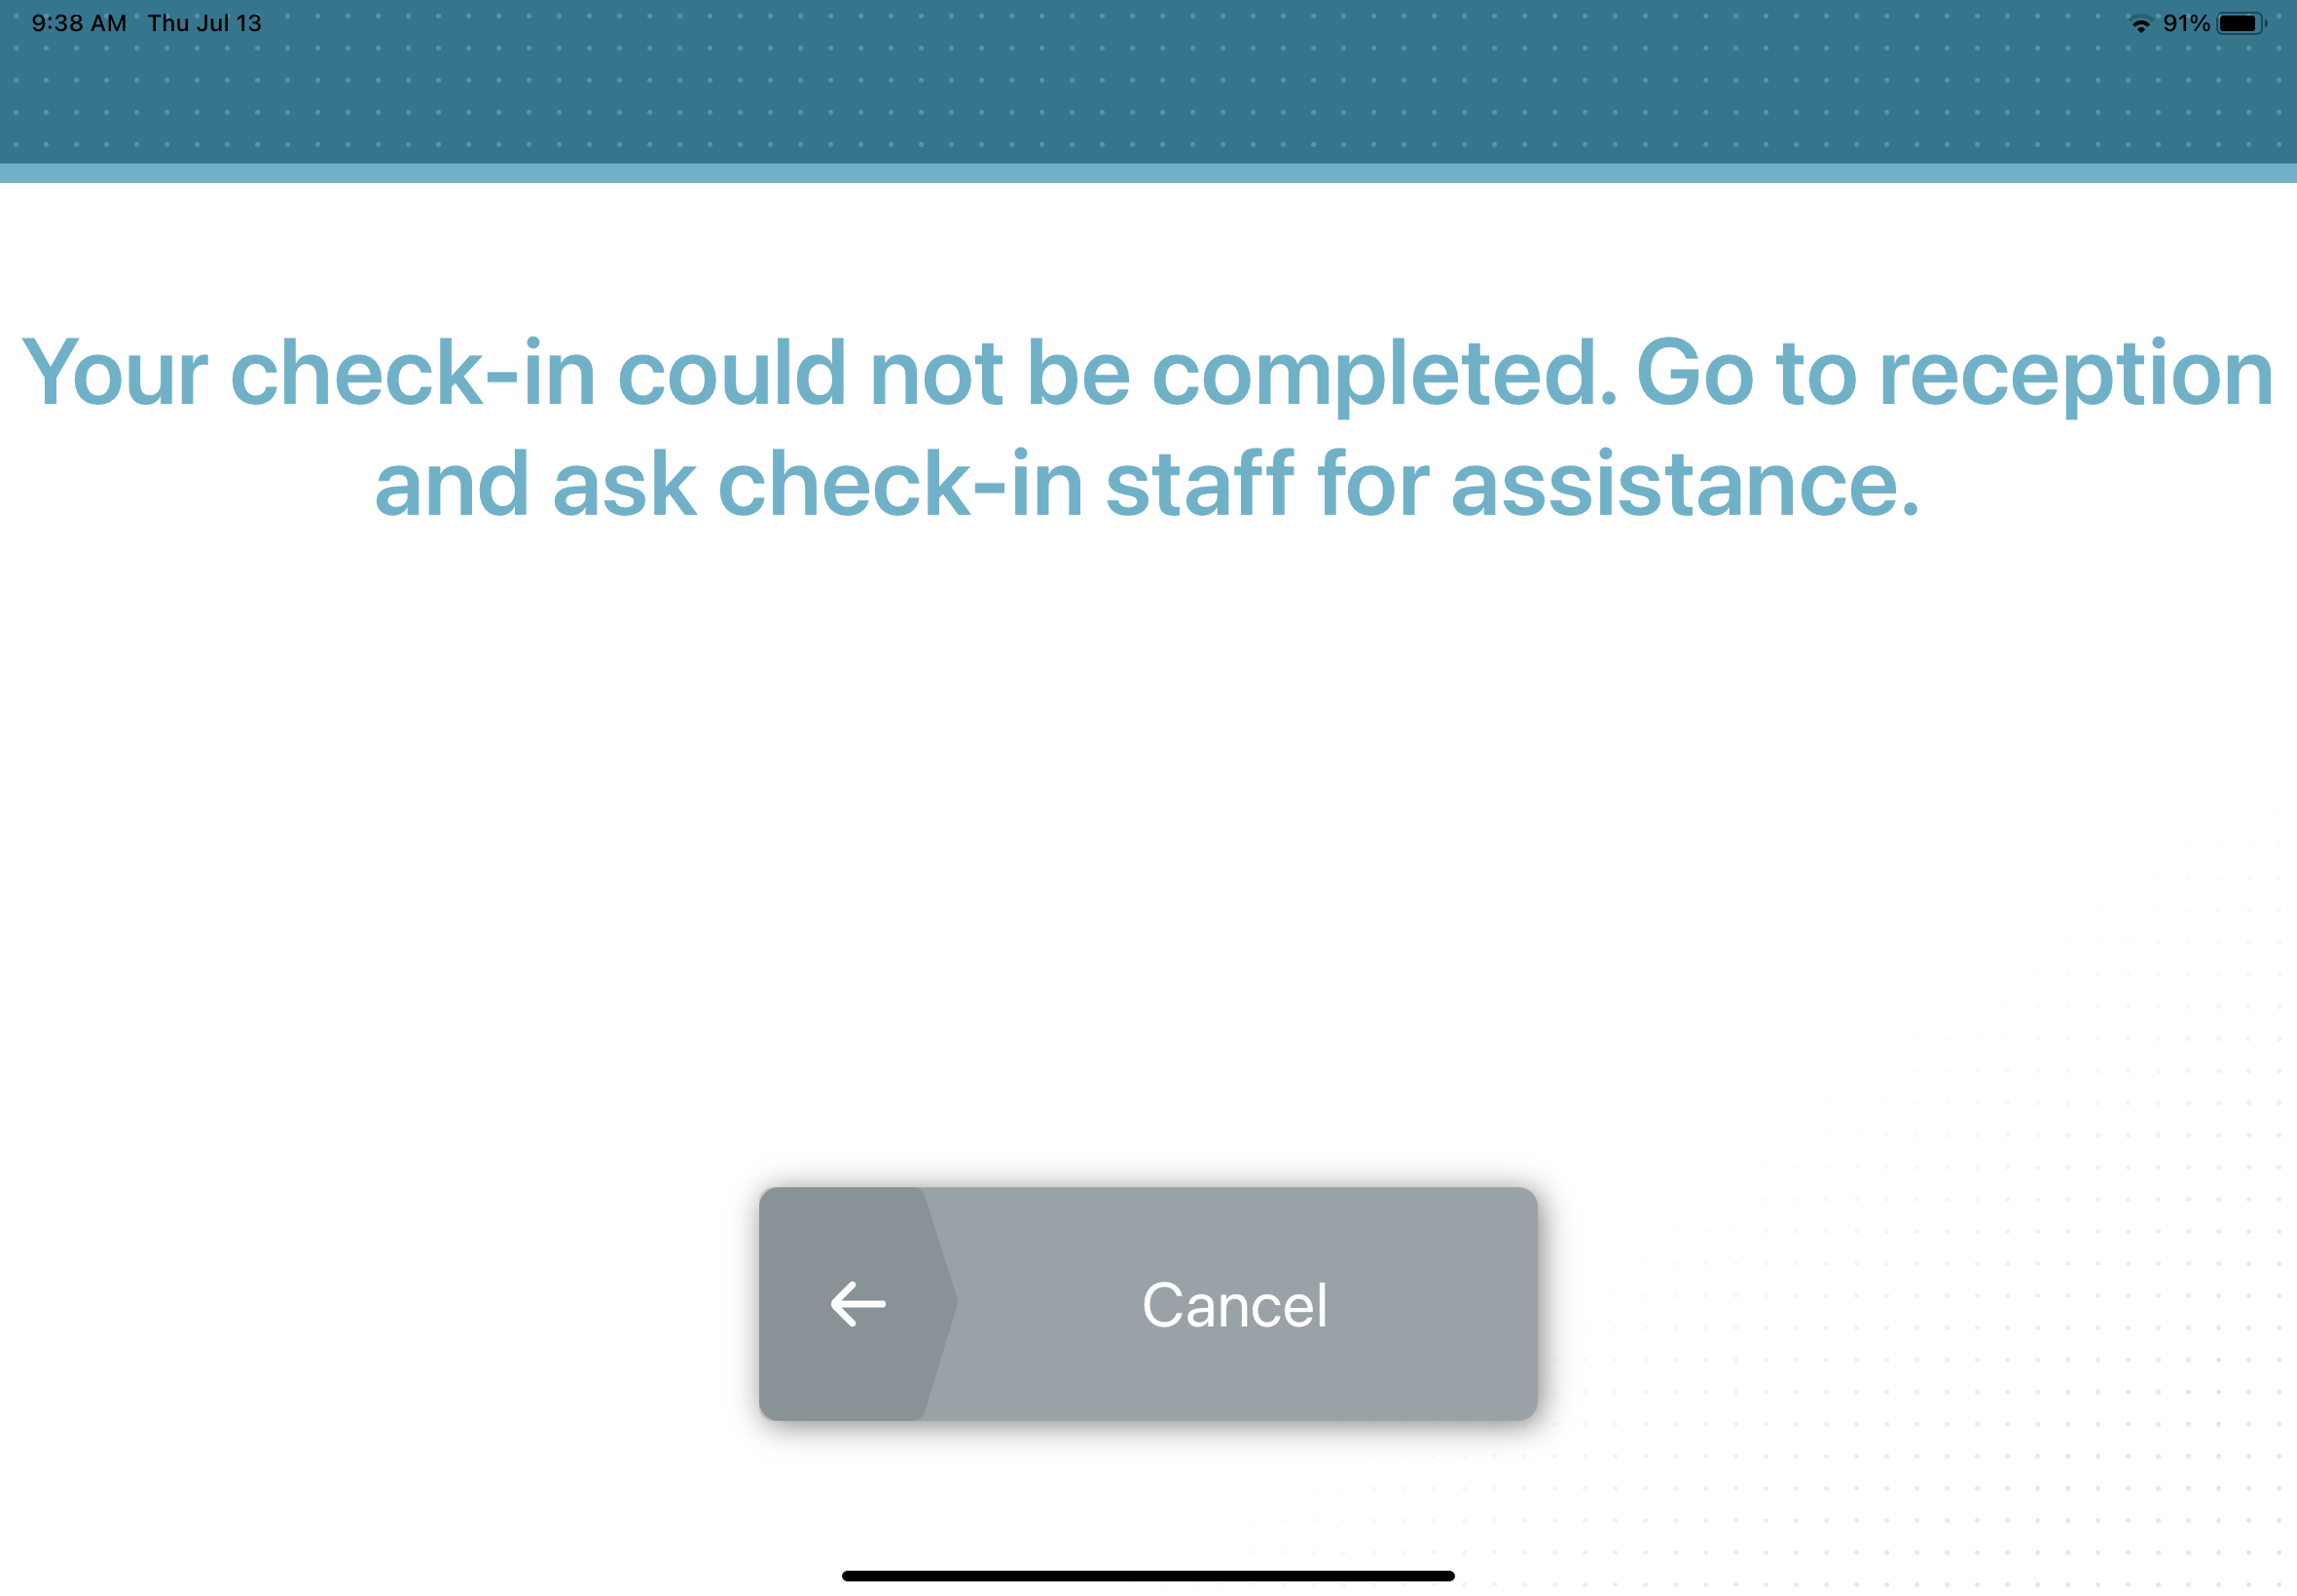 ClearID Self-Service Kiosk mobile app showing the check-in could not be completed error message.